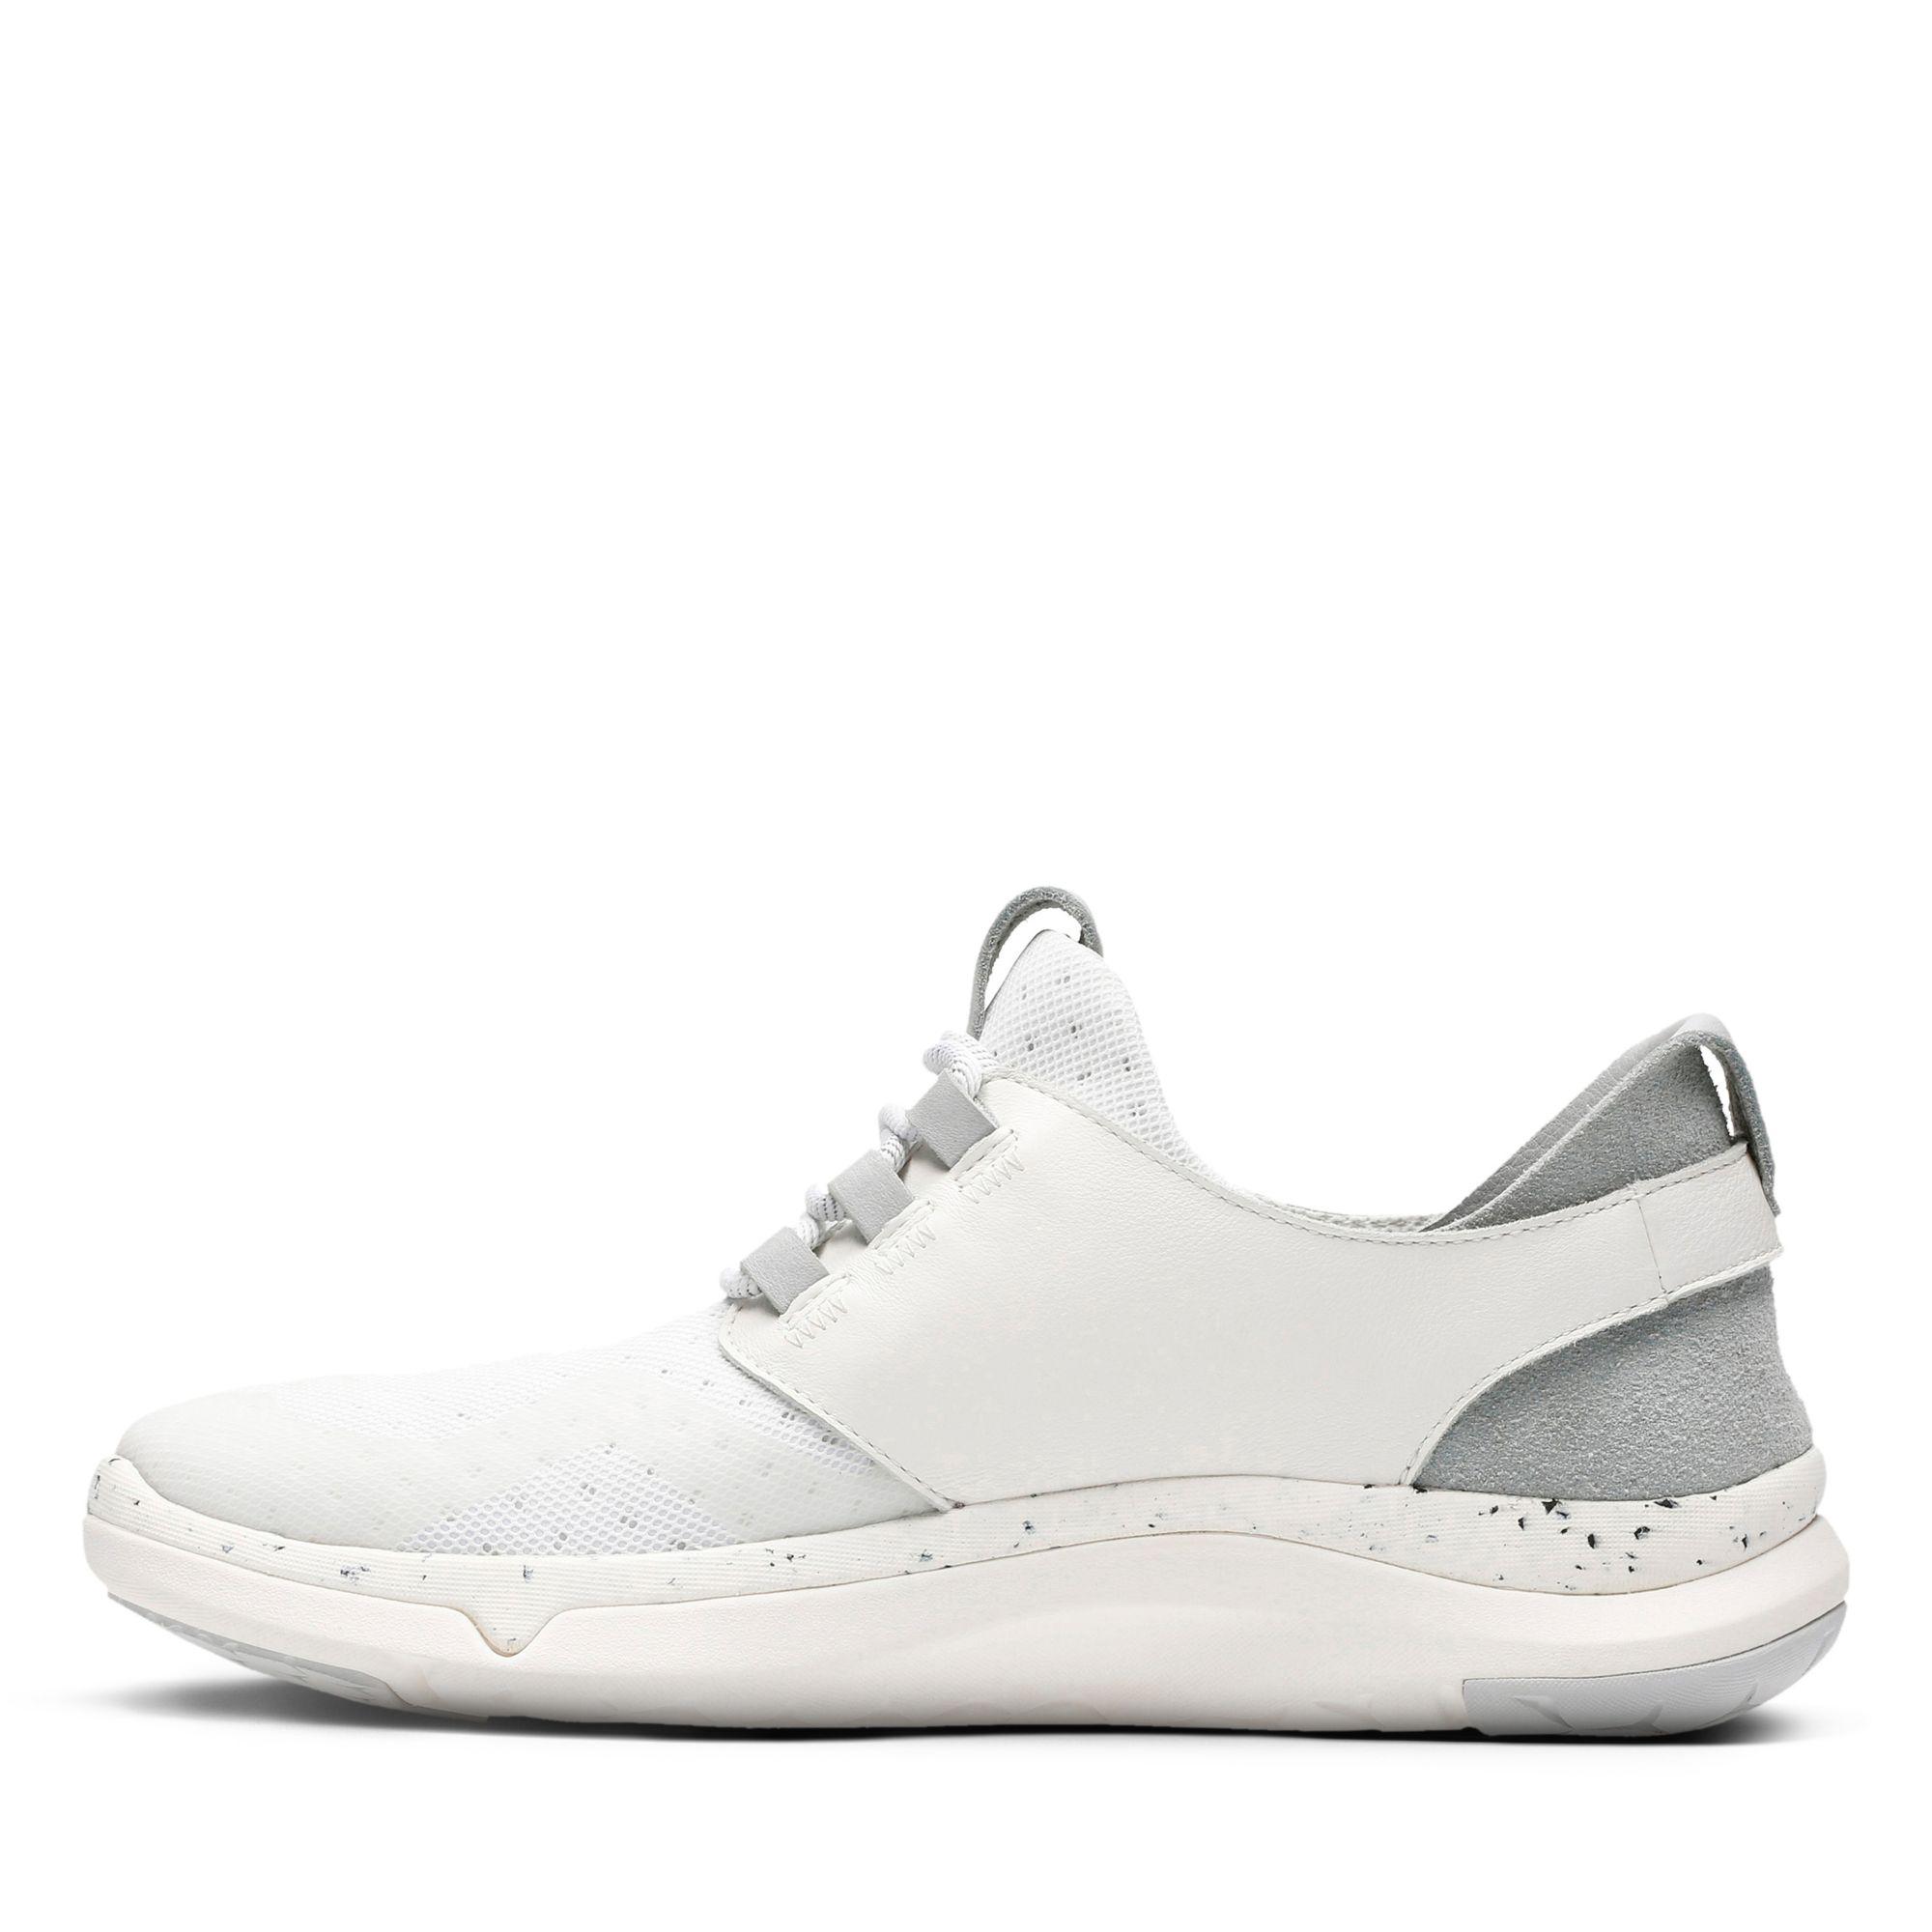 Clarks Leather Privo Motion in White/Grey (White) for Men - Lyst